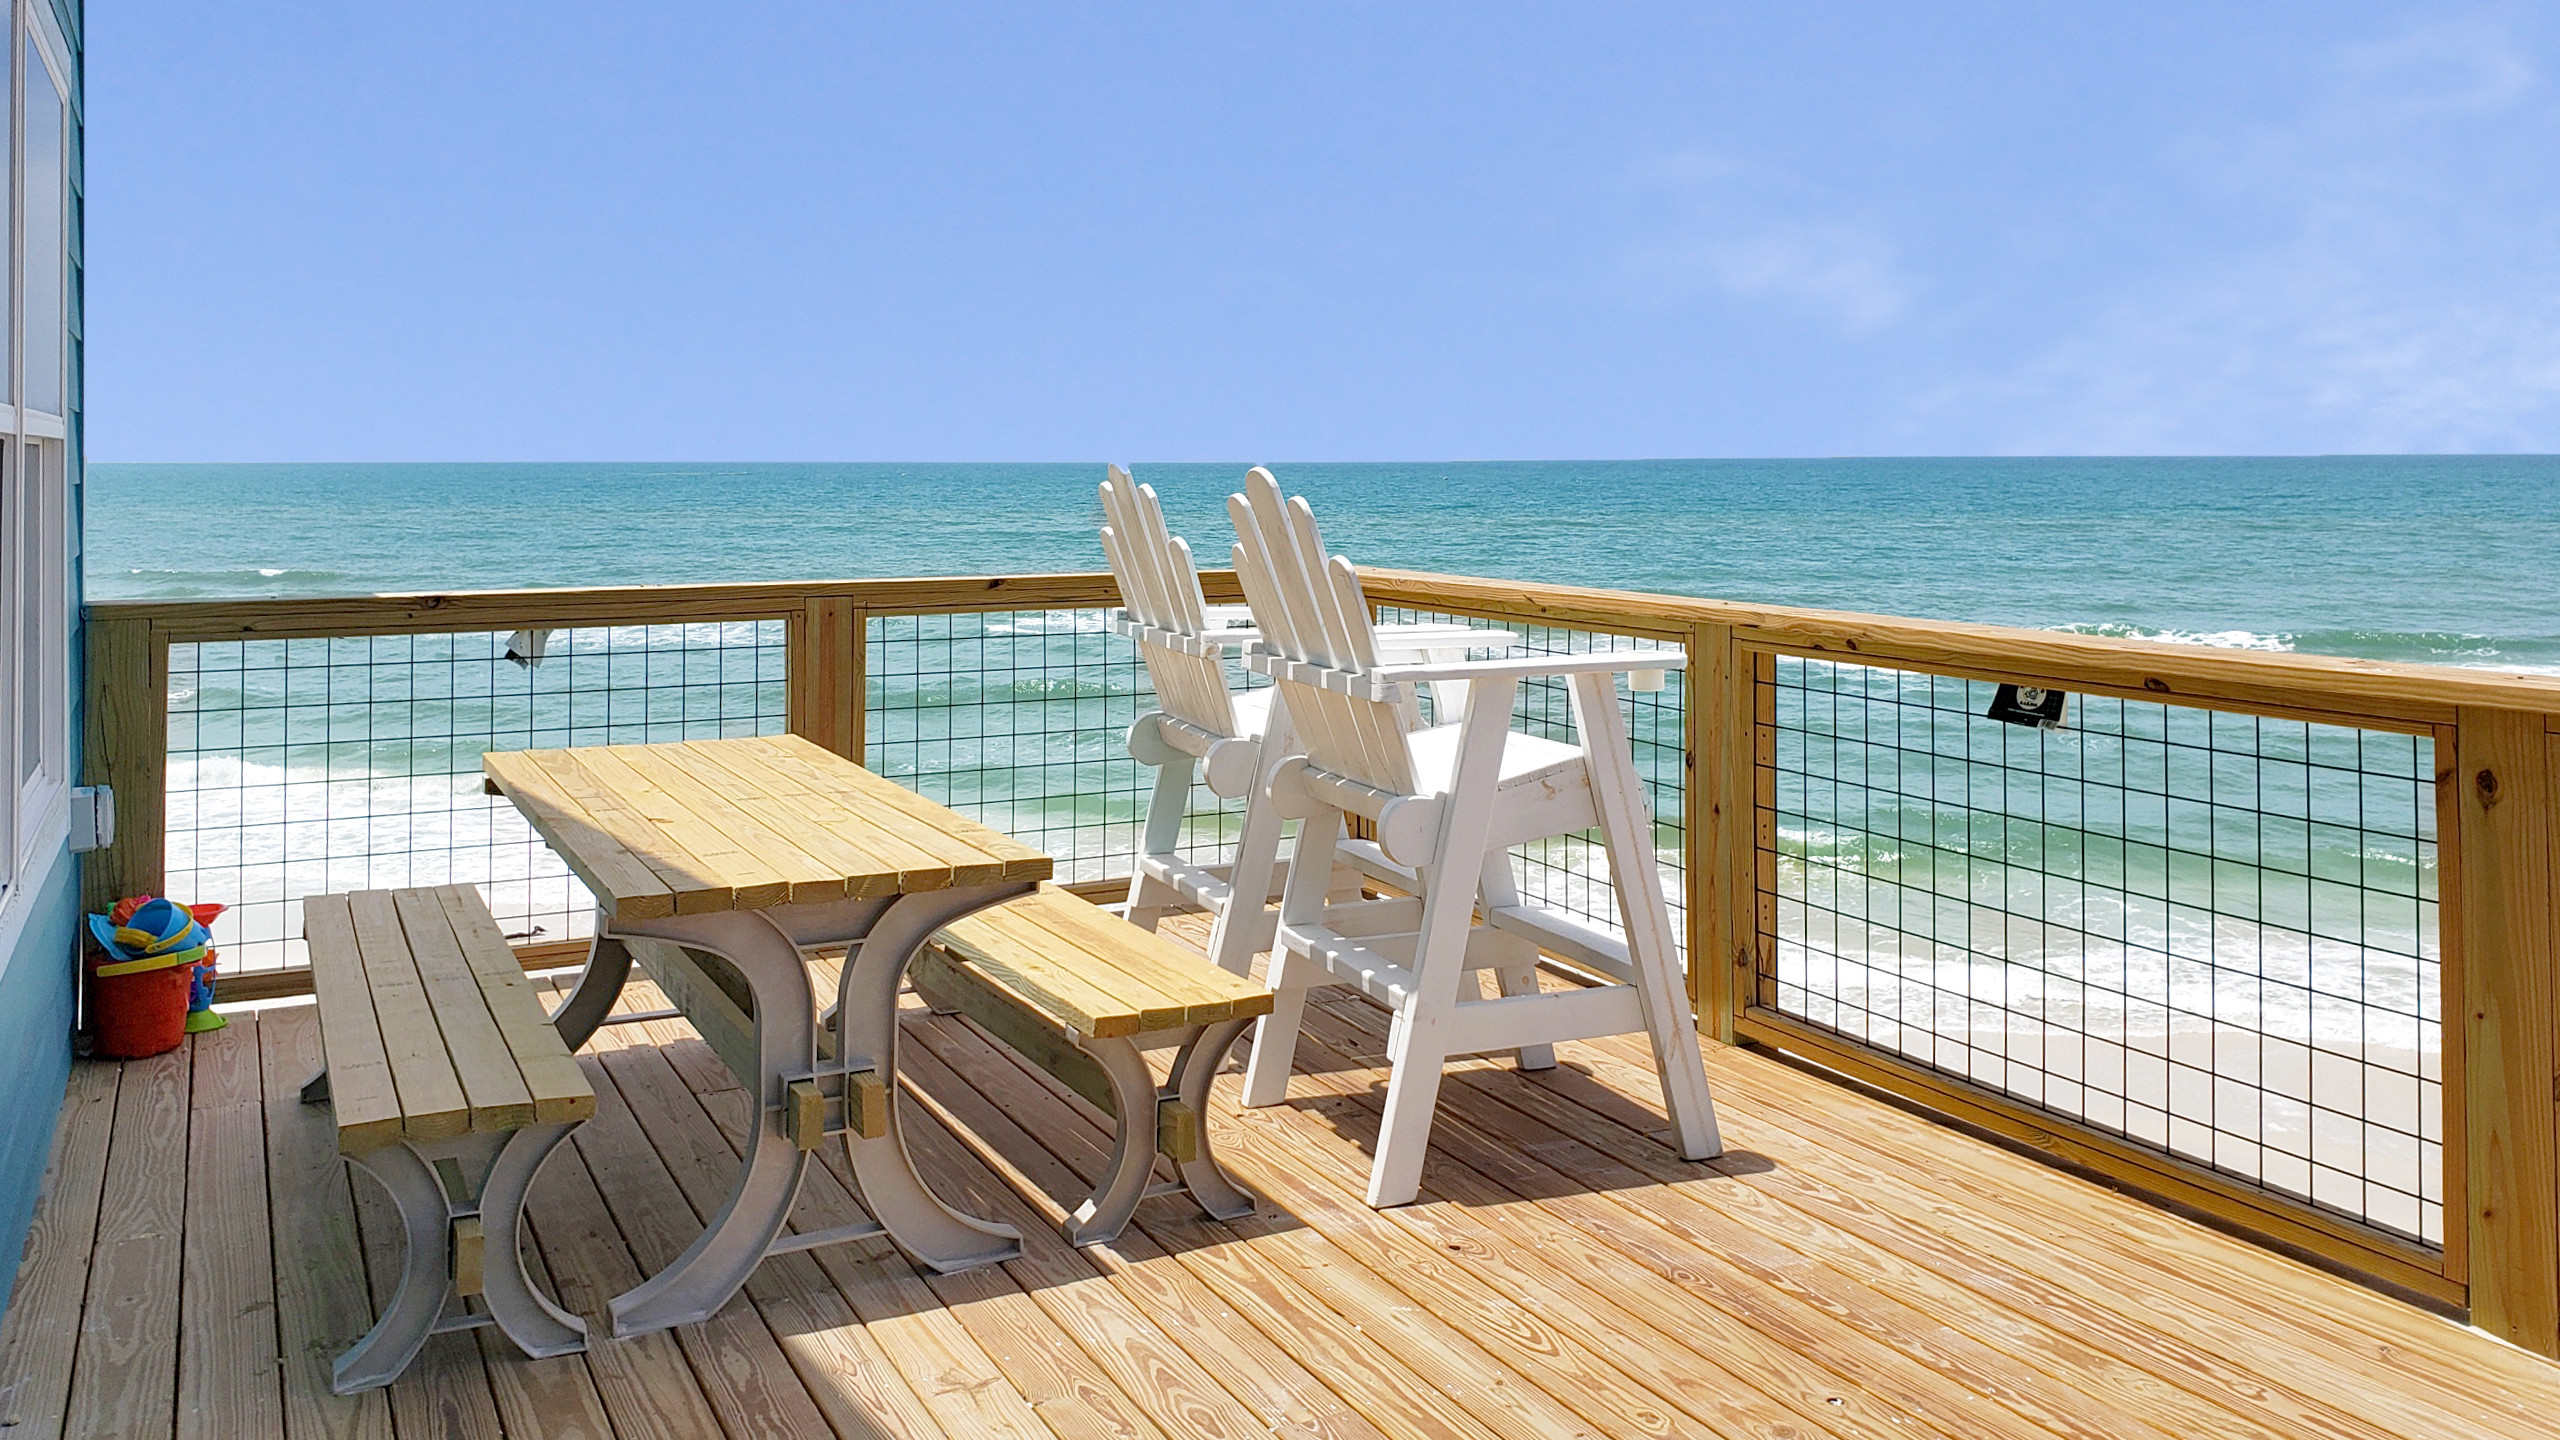 Huge deck with unobstructed ocean views for miles